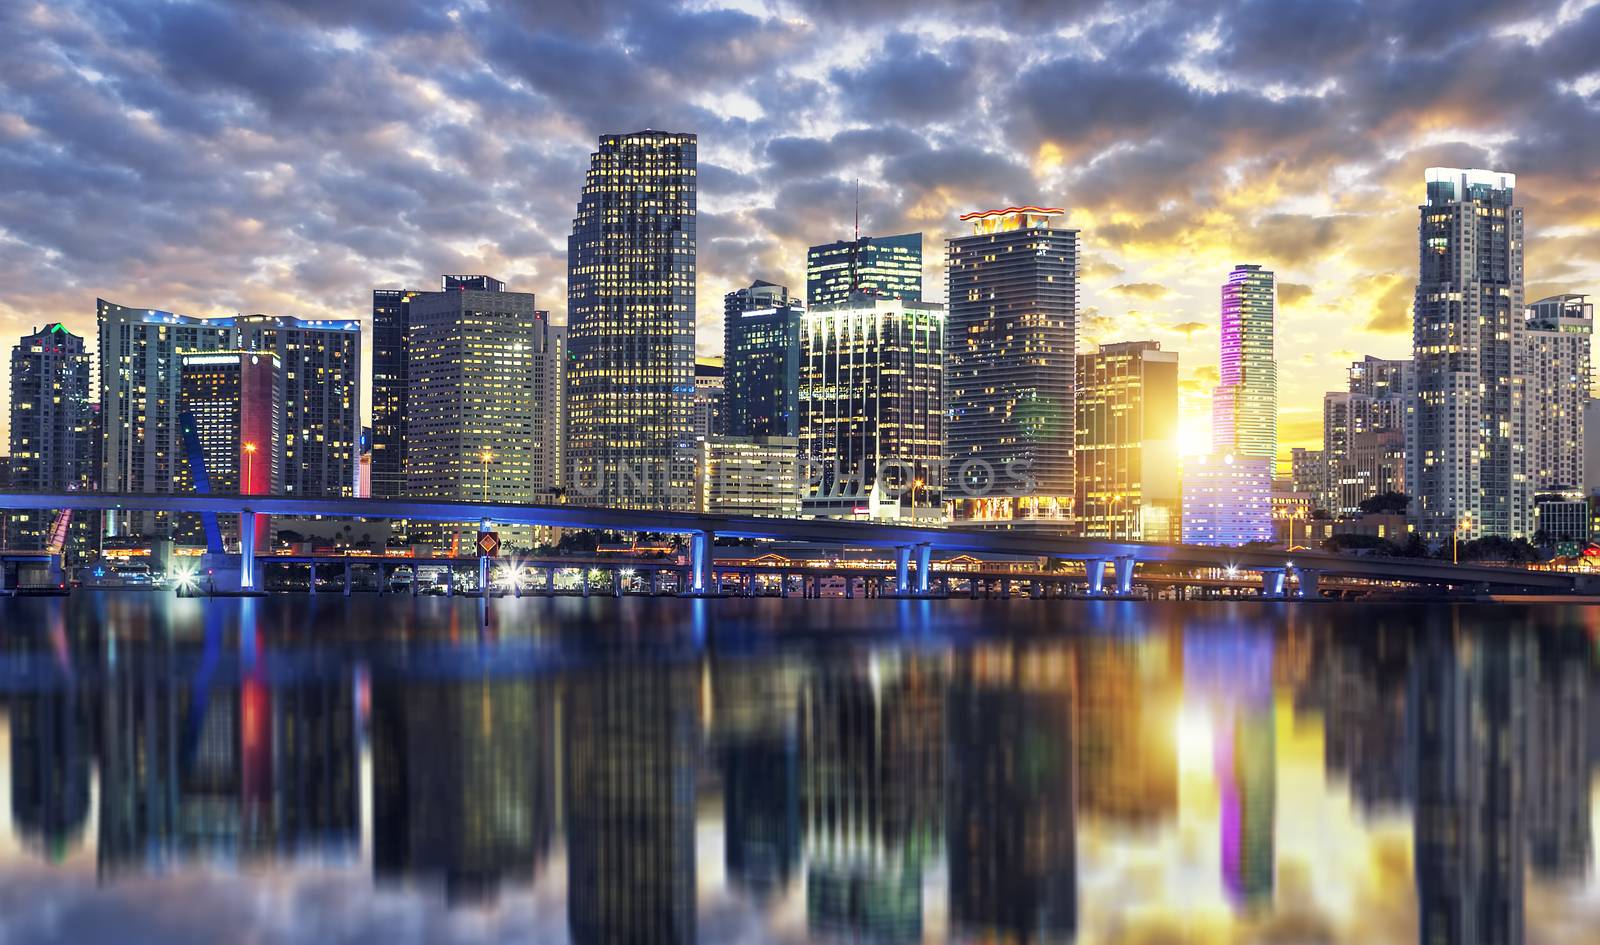 View of Miami buildings at sunset, USA